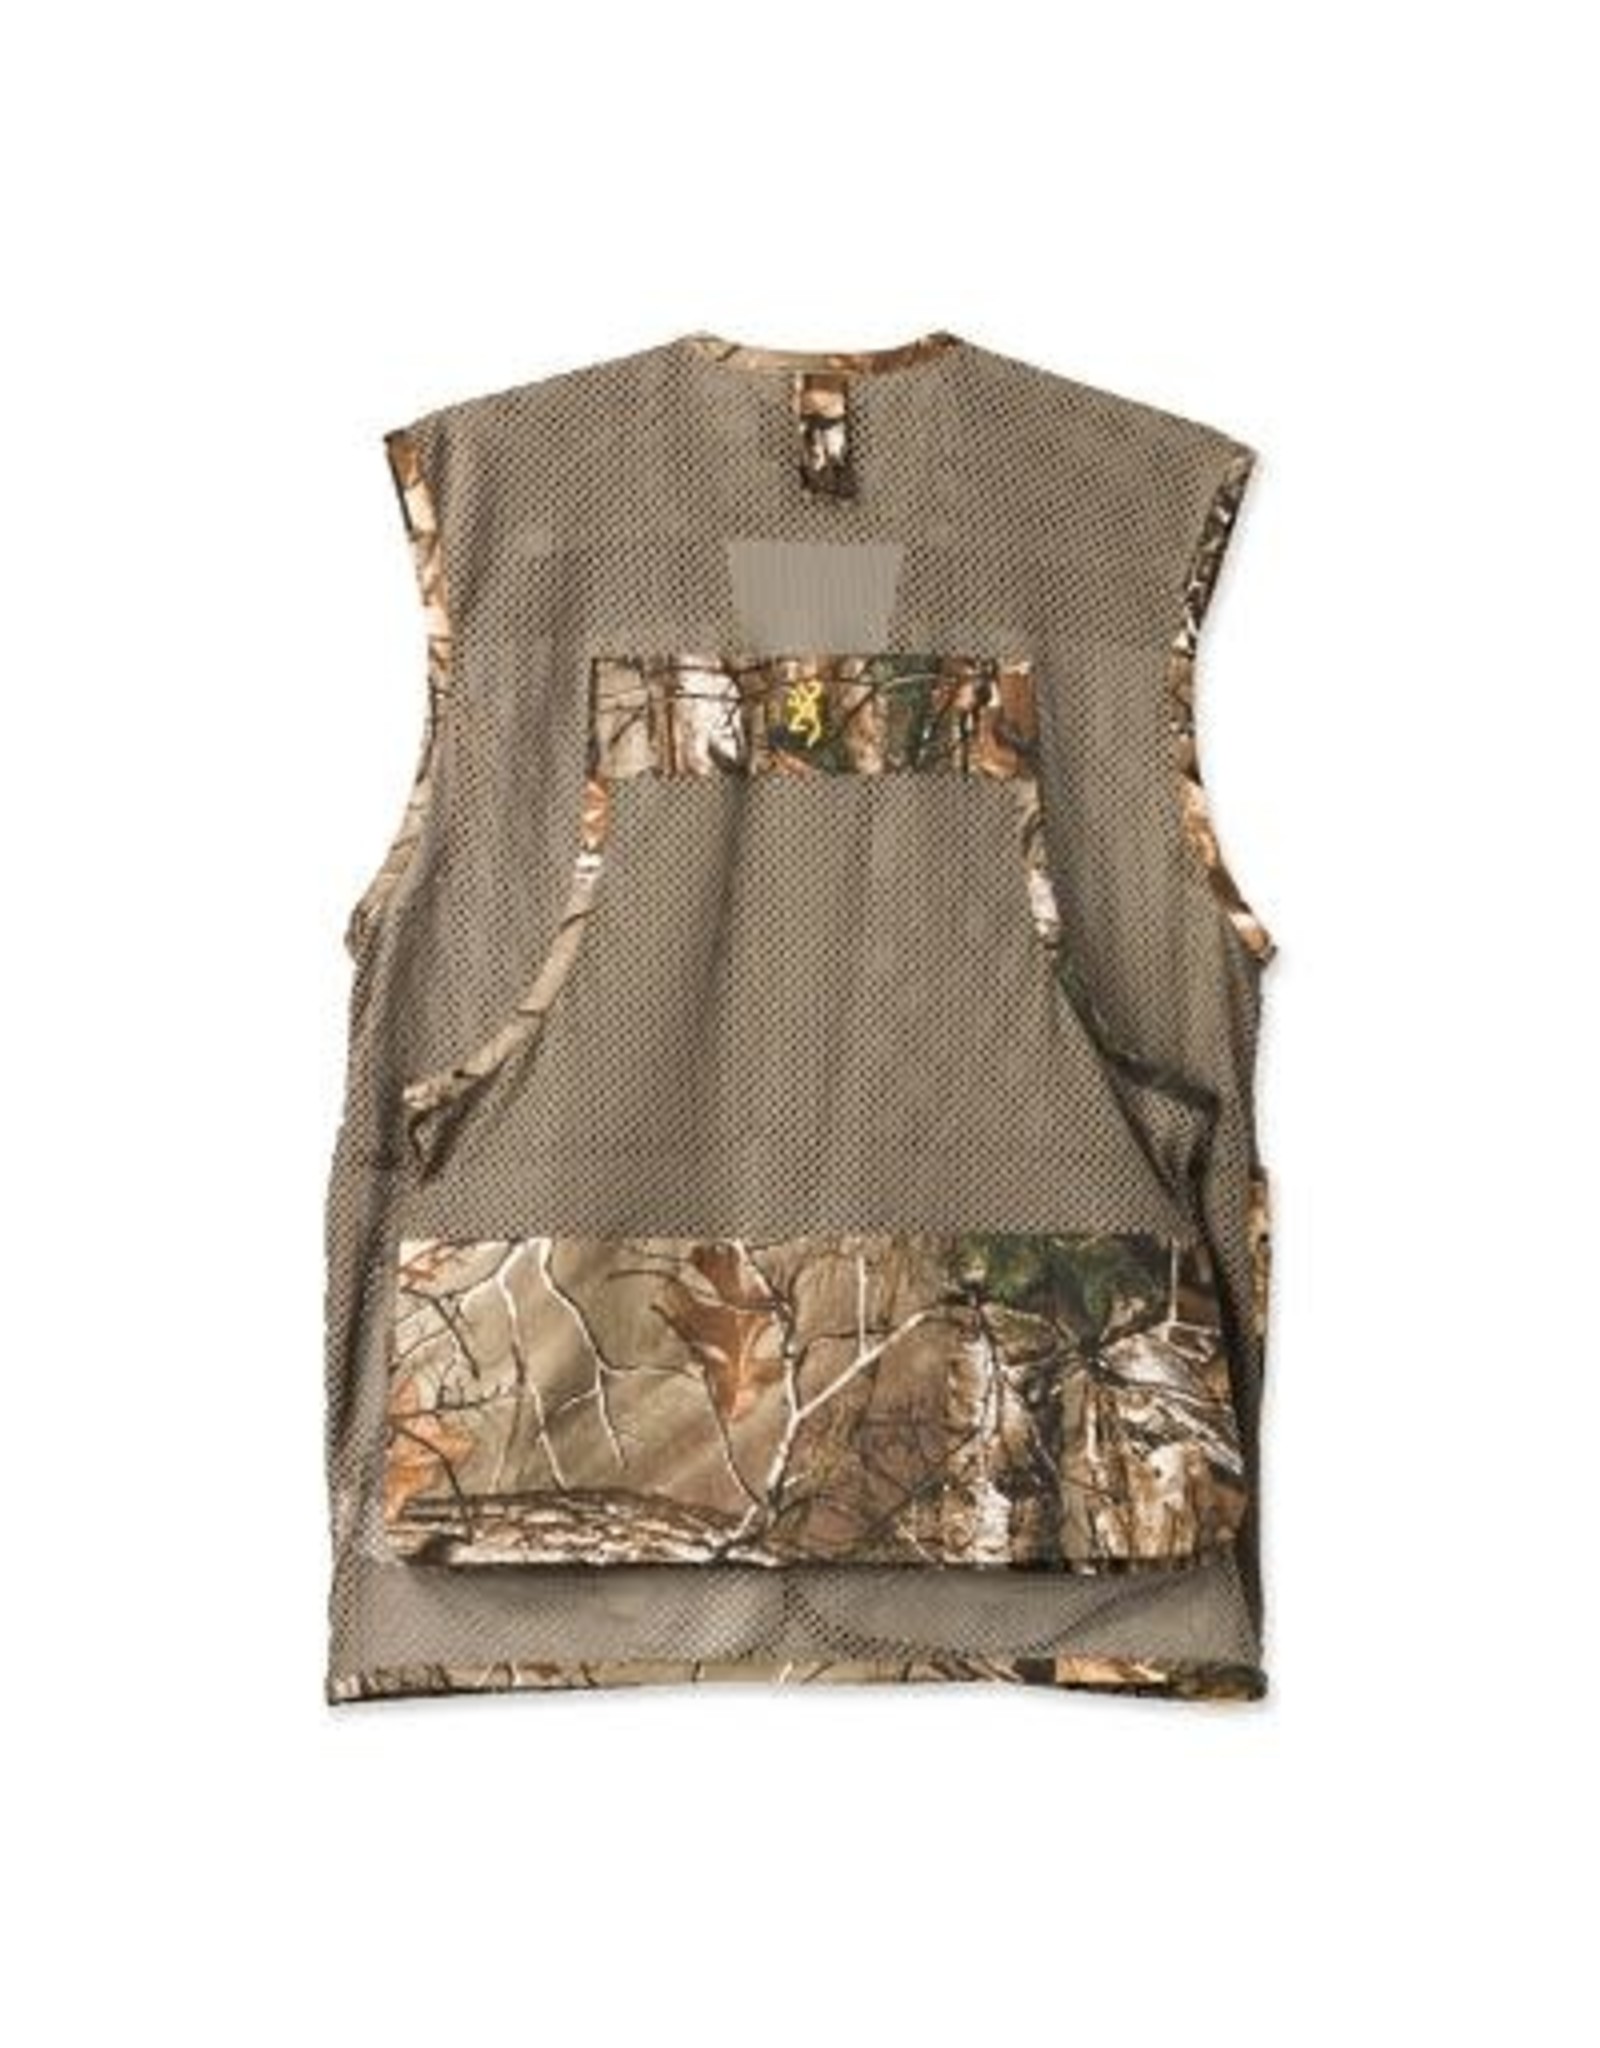 Browning Browning Upland Dove Vest - XL